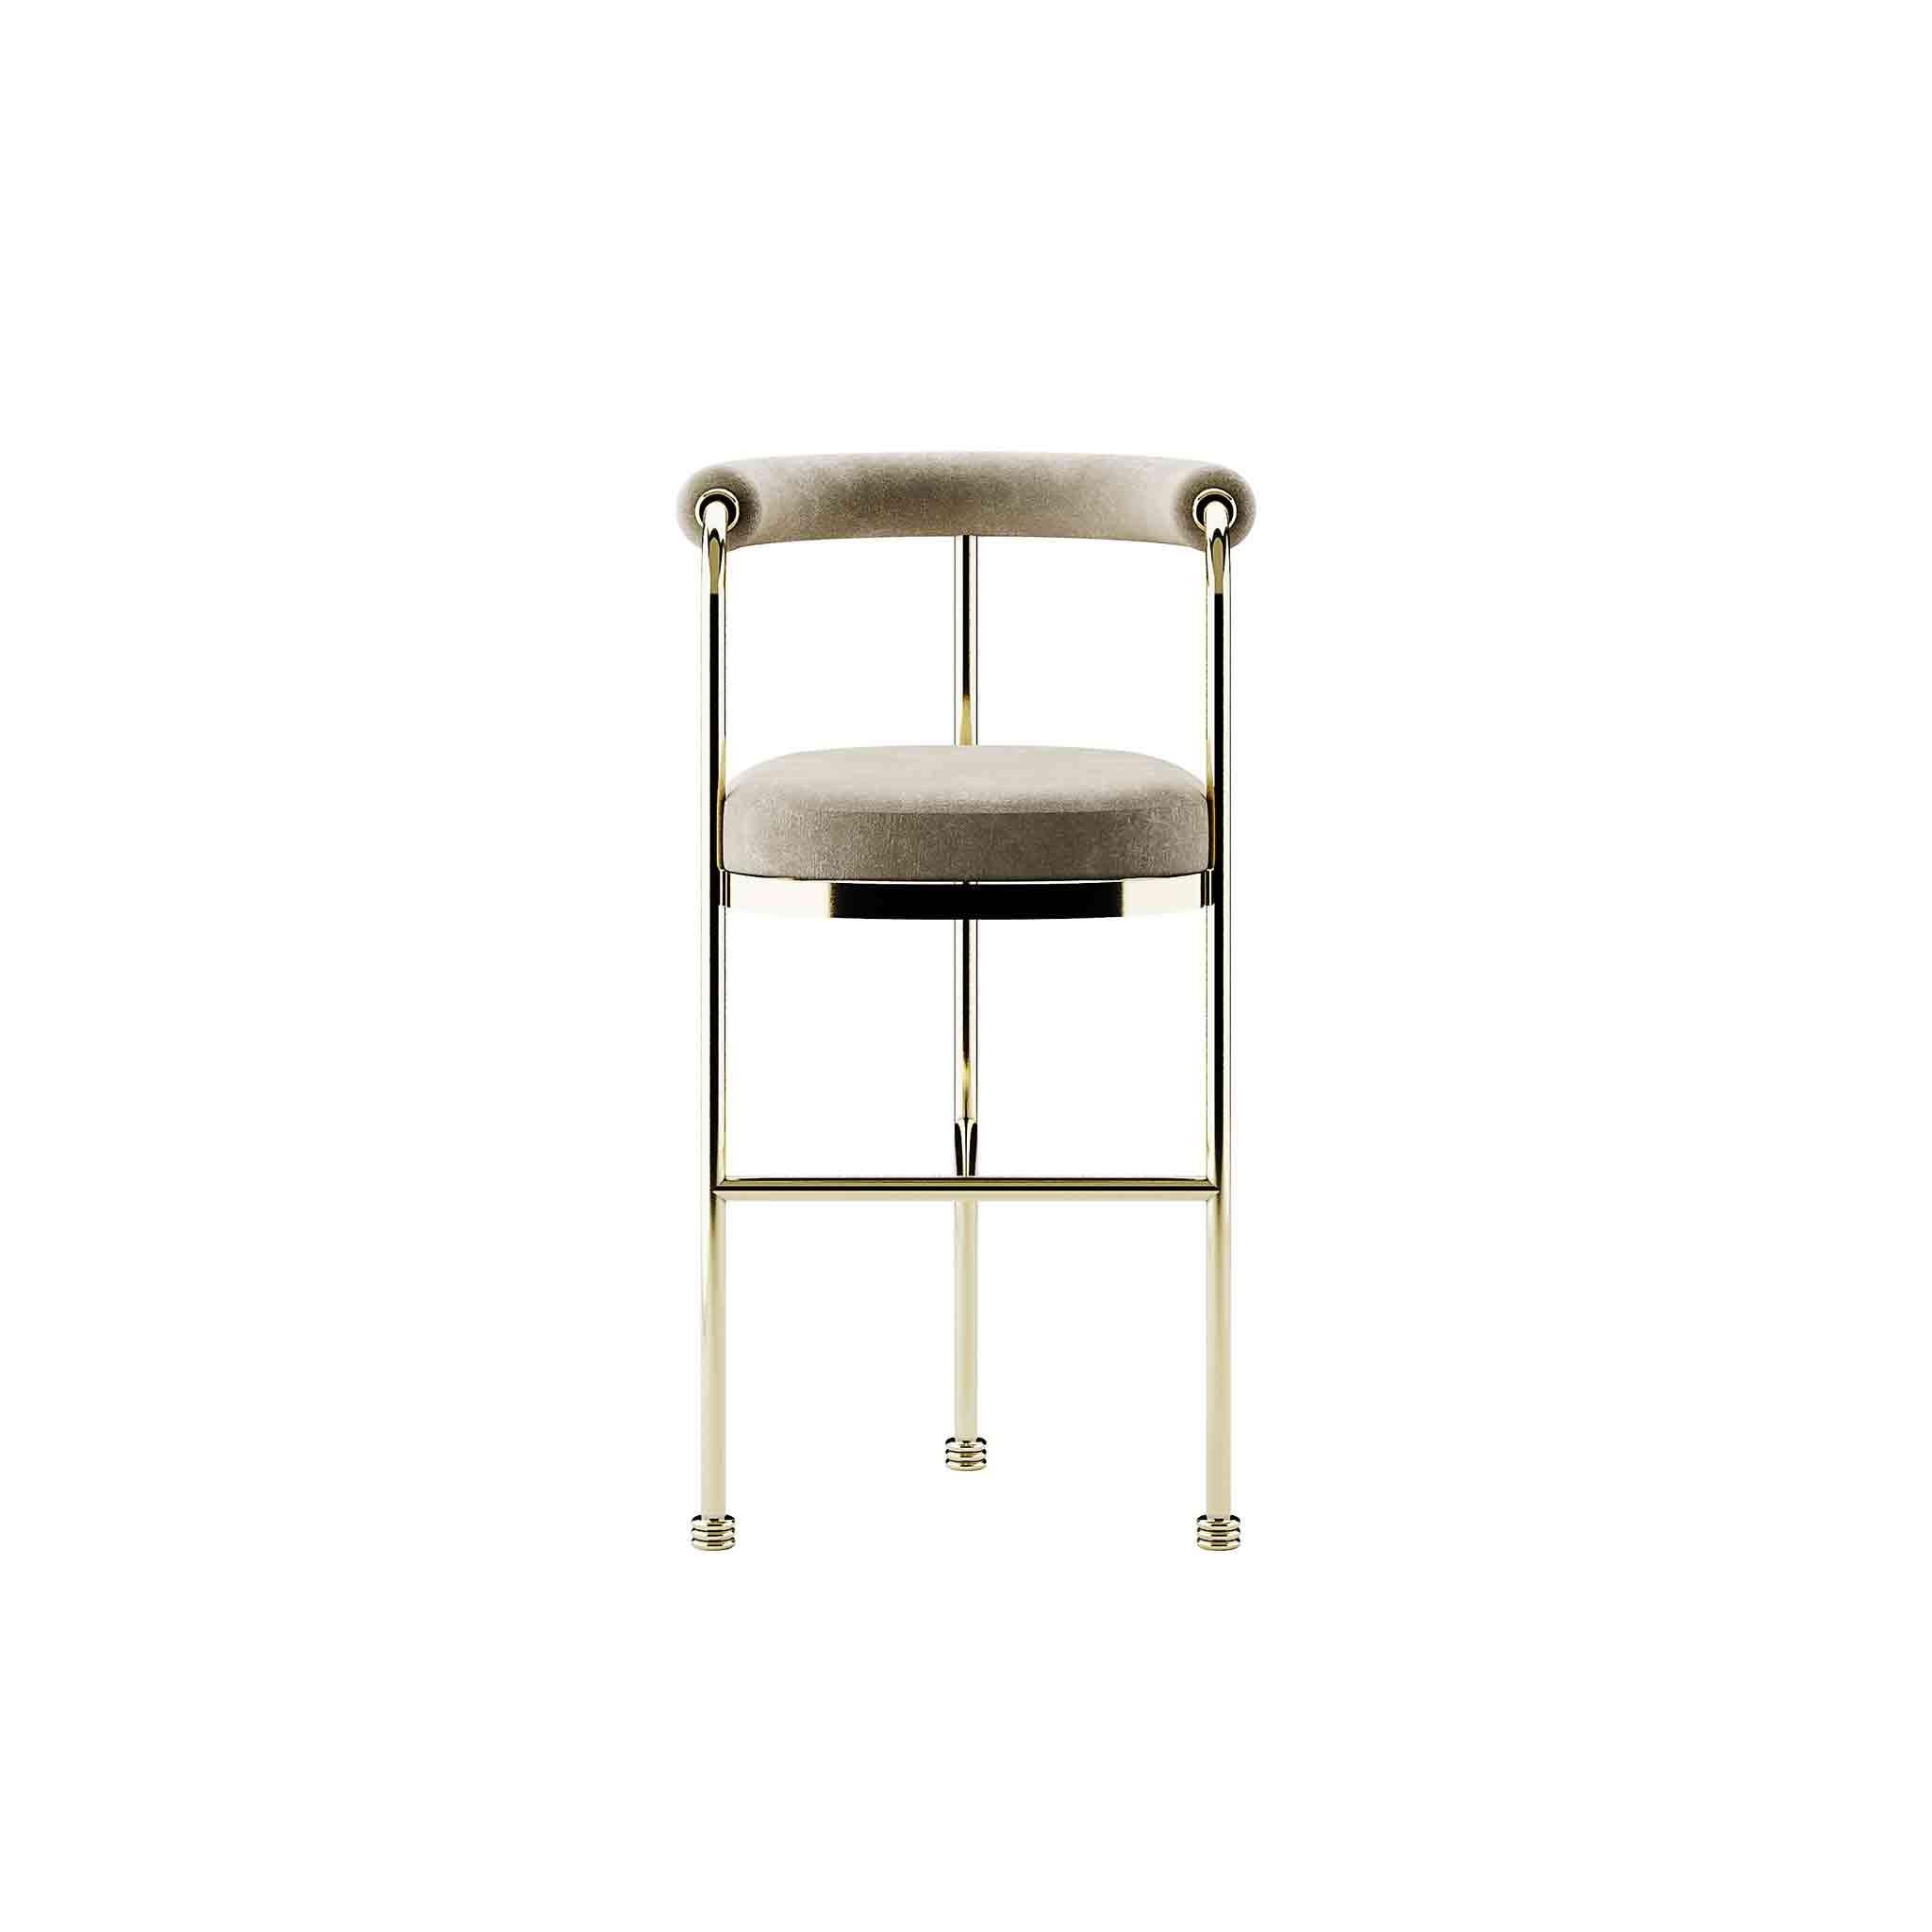 Limited Edition: Art Deco Style Modern Velvet Bar Chair or Counter Height With Golden Details

Joanne Chair is a mid-century style bar chair. It will enhance any space, improving your next hospitality project. This piece materializes a new concept